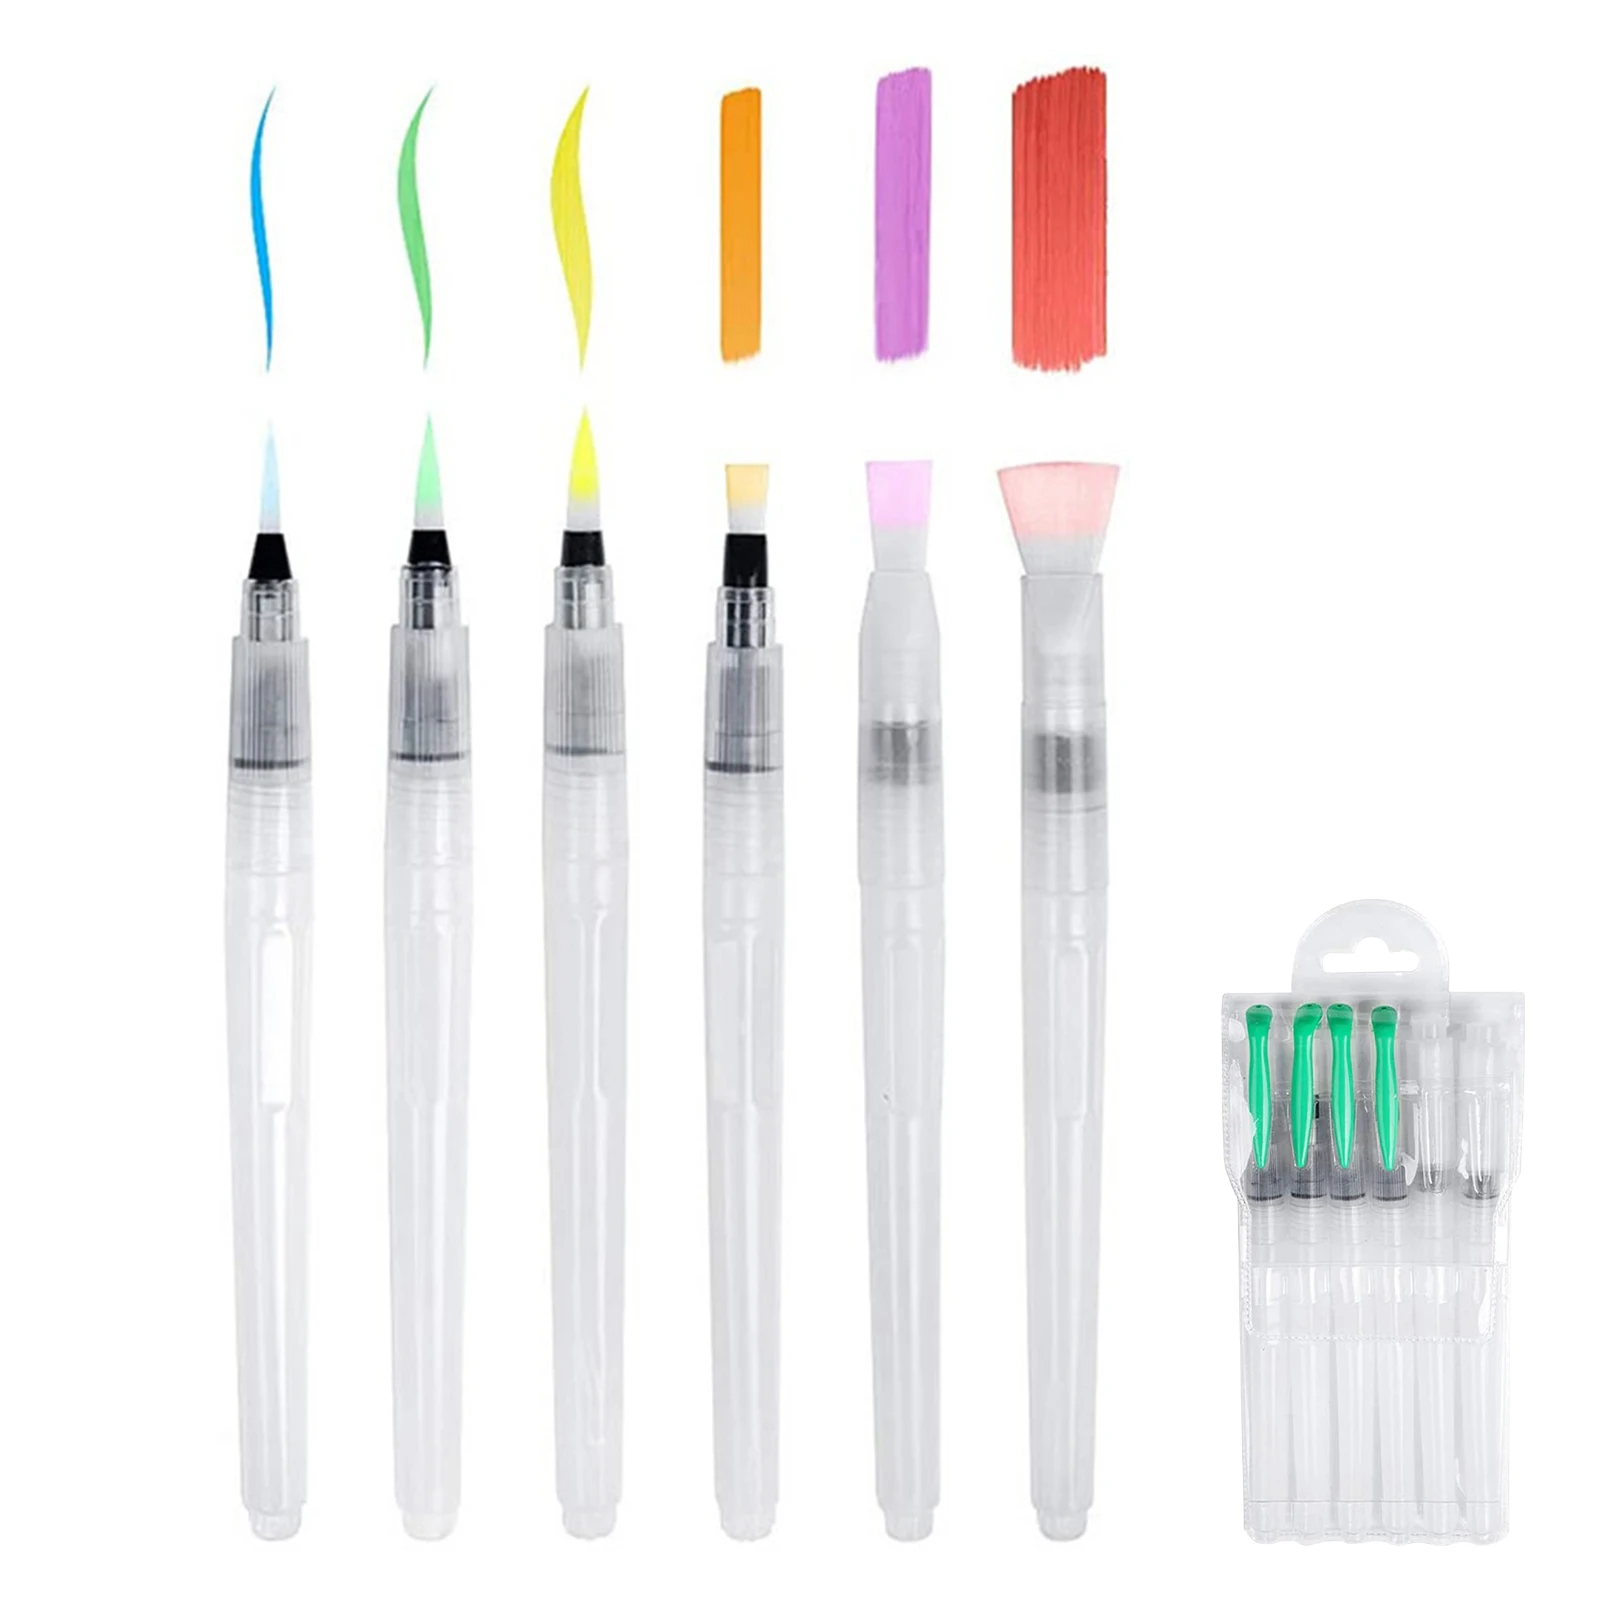 

6pcs Reusable School Home Beginner Professional Calligraphy Stationery Art Supplies For Watercolour Different Size Paint Brushes